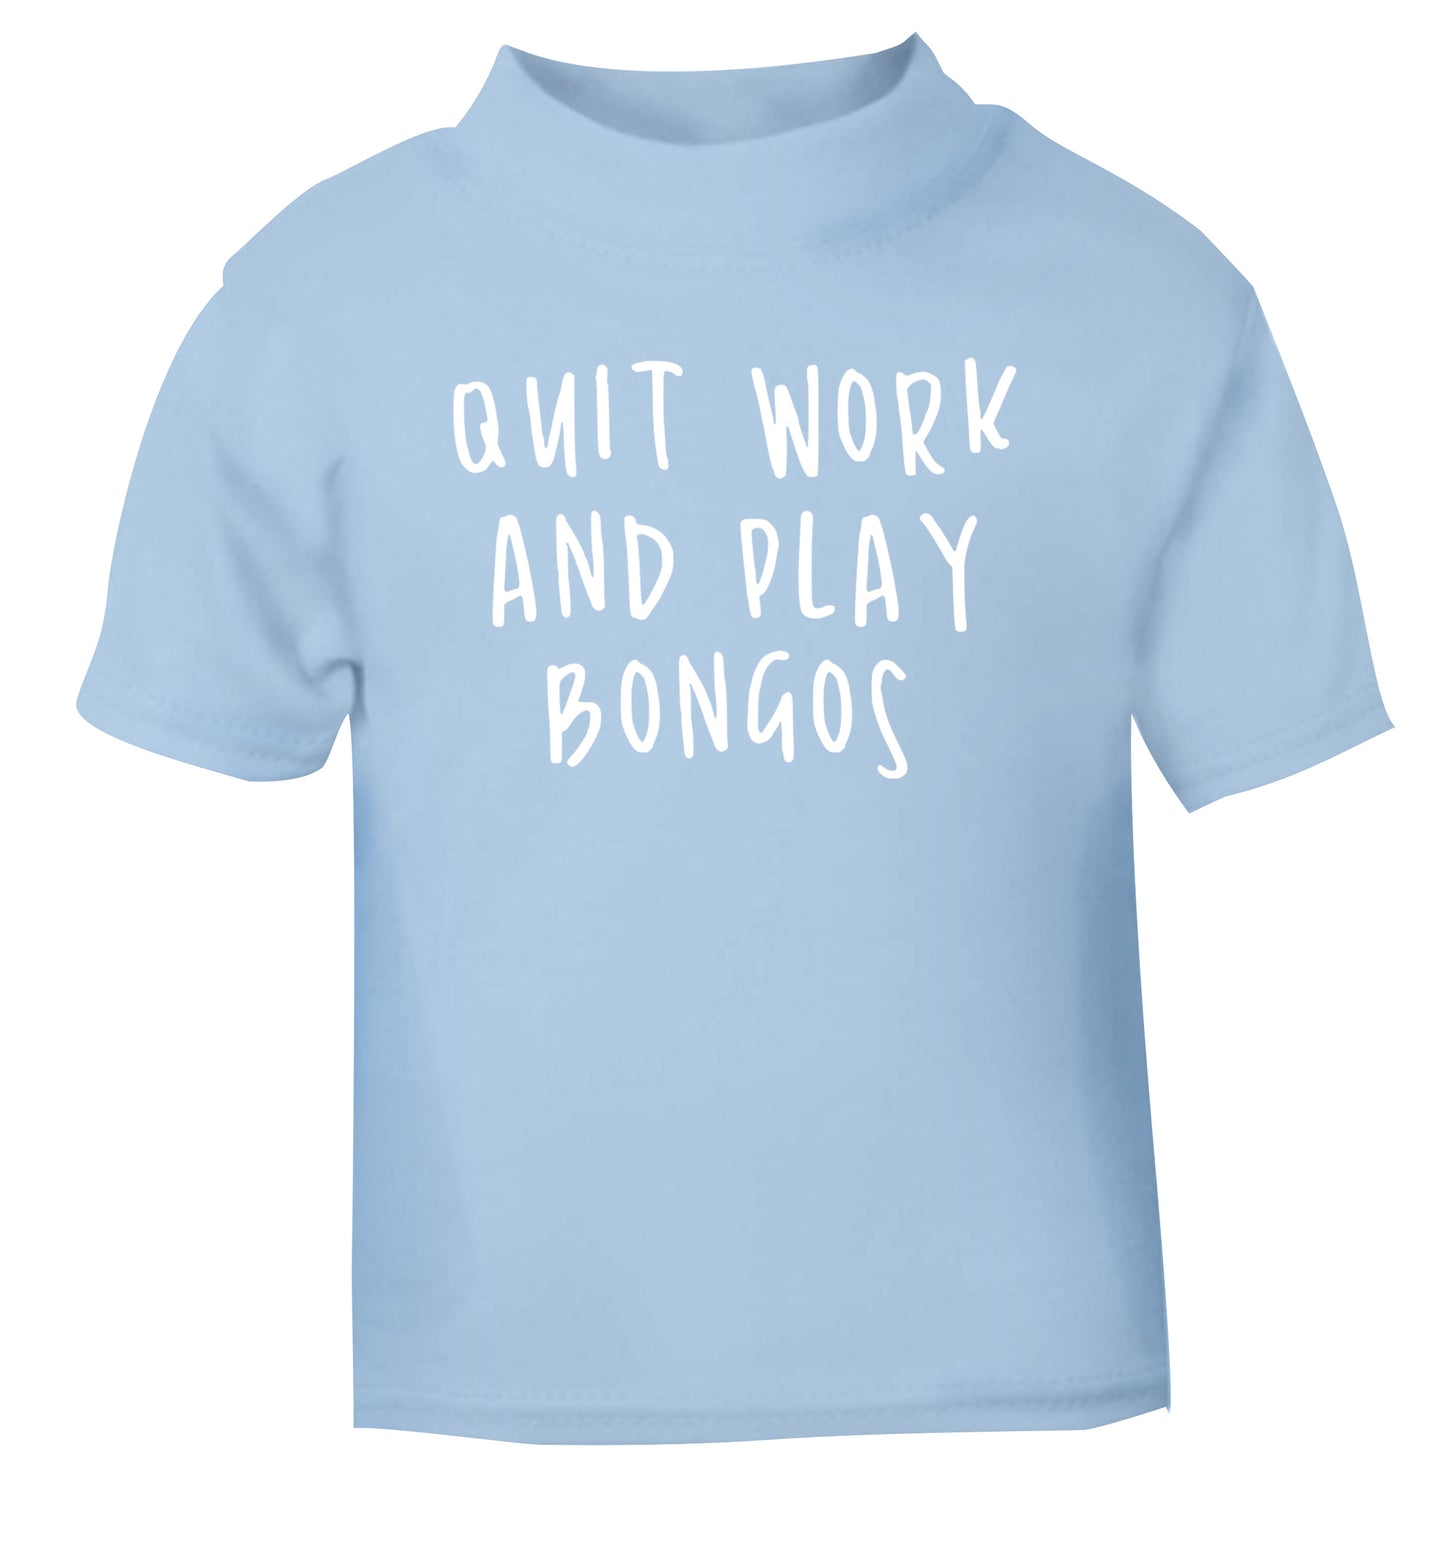 Quit work and play bongos light blue Baby Toddler Tshirt 2 Years